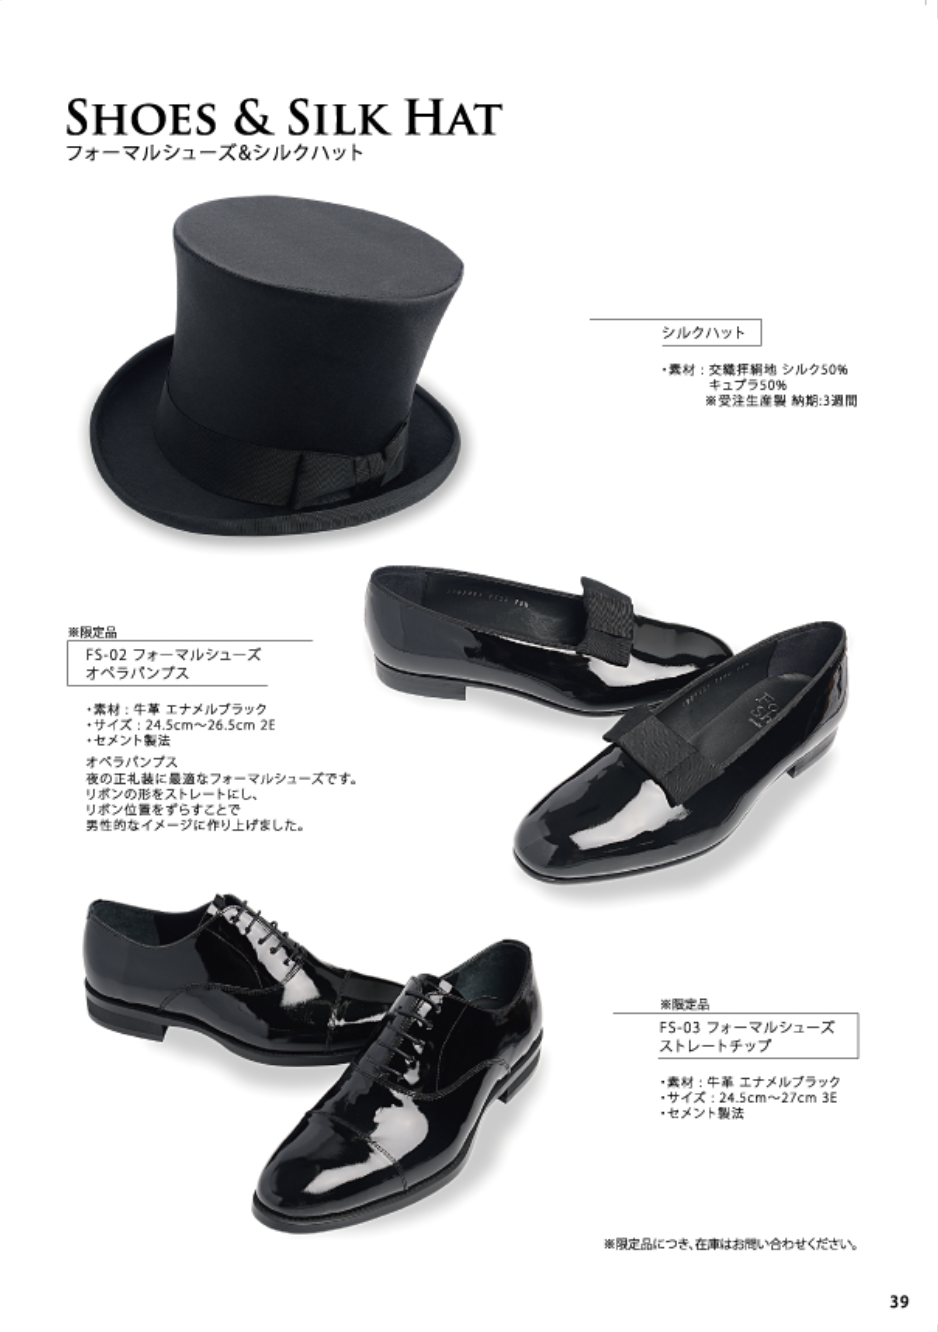 EXCY FORMAL ACCESSORY COLLECTION Vol.8 pg.39